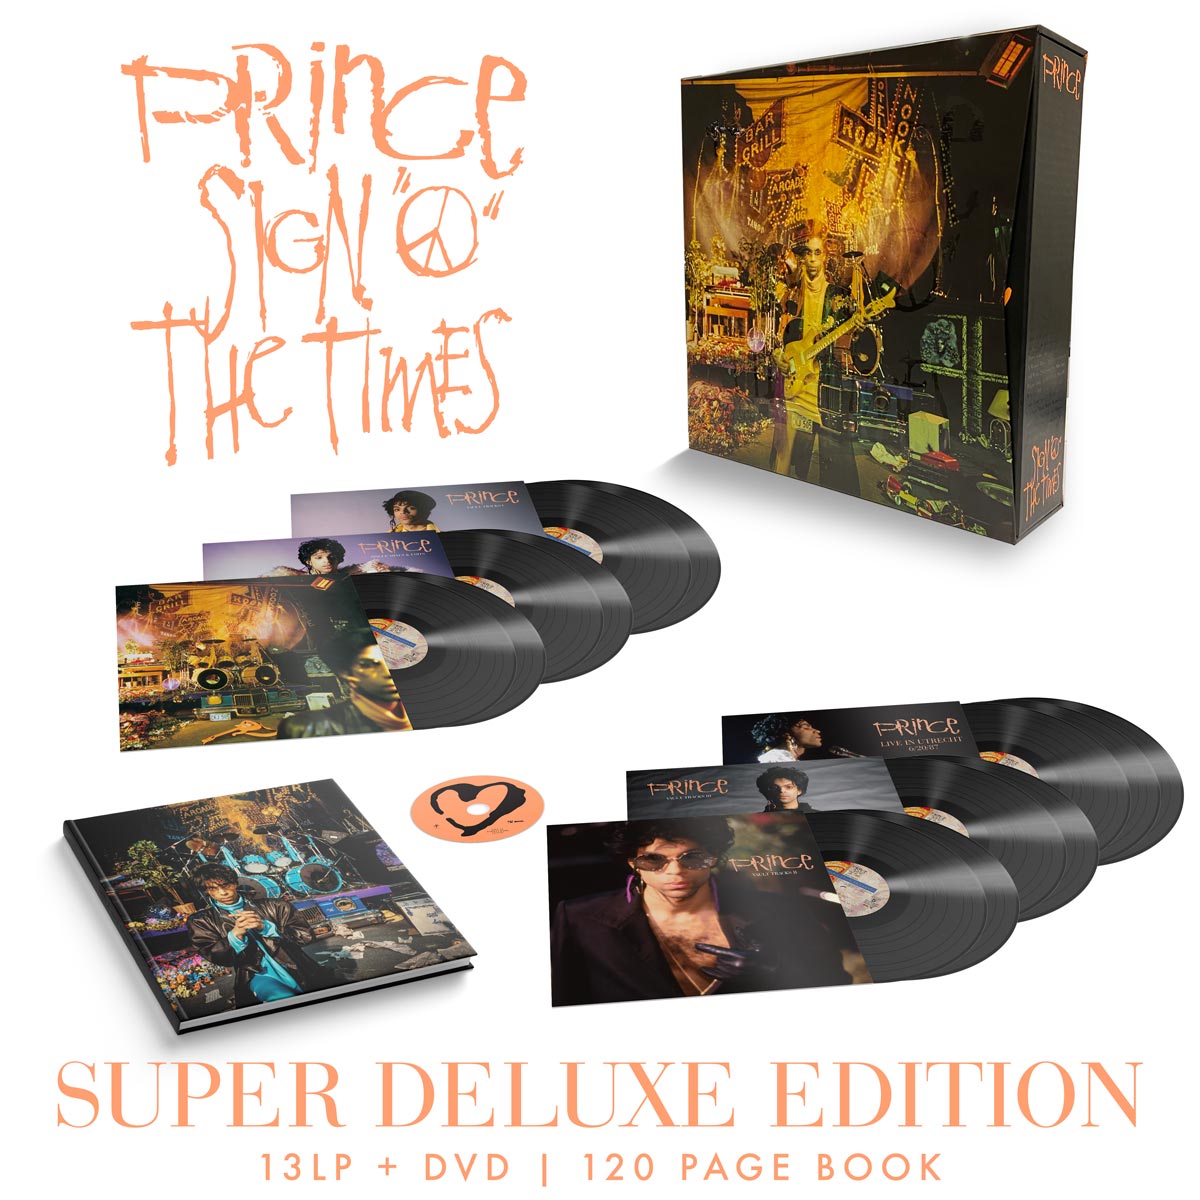 Prince: Sign o' the times (Super deluxe/Ltd)